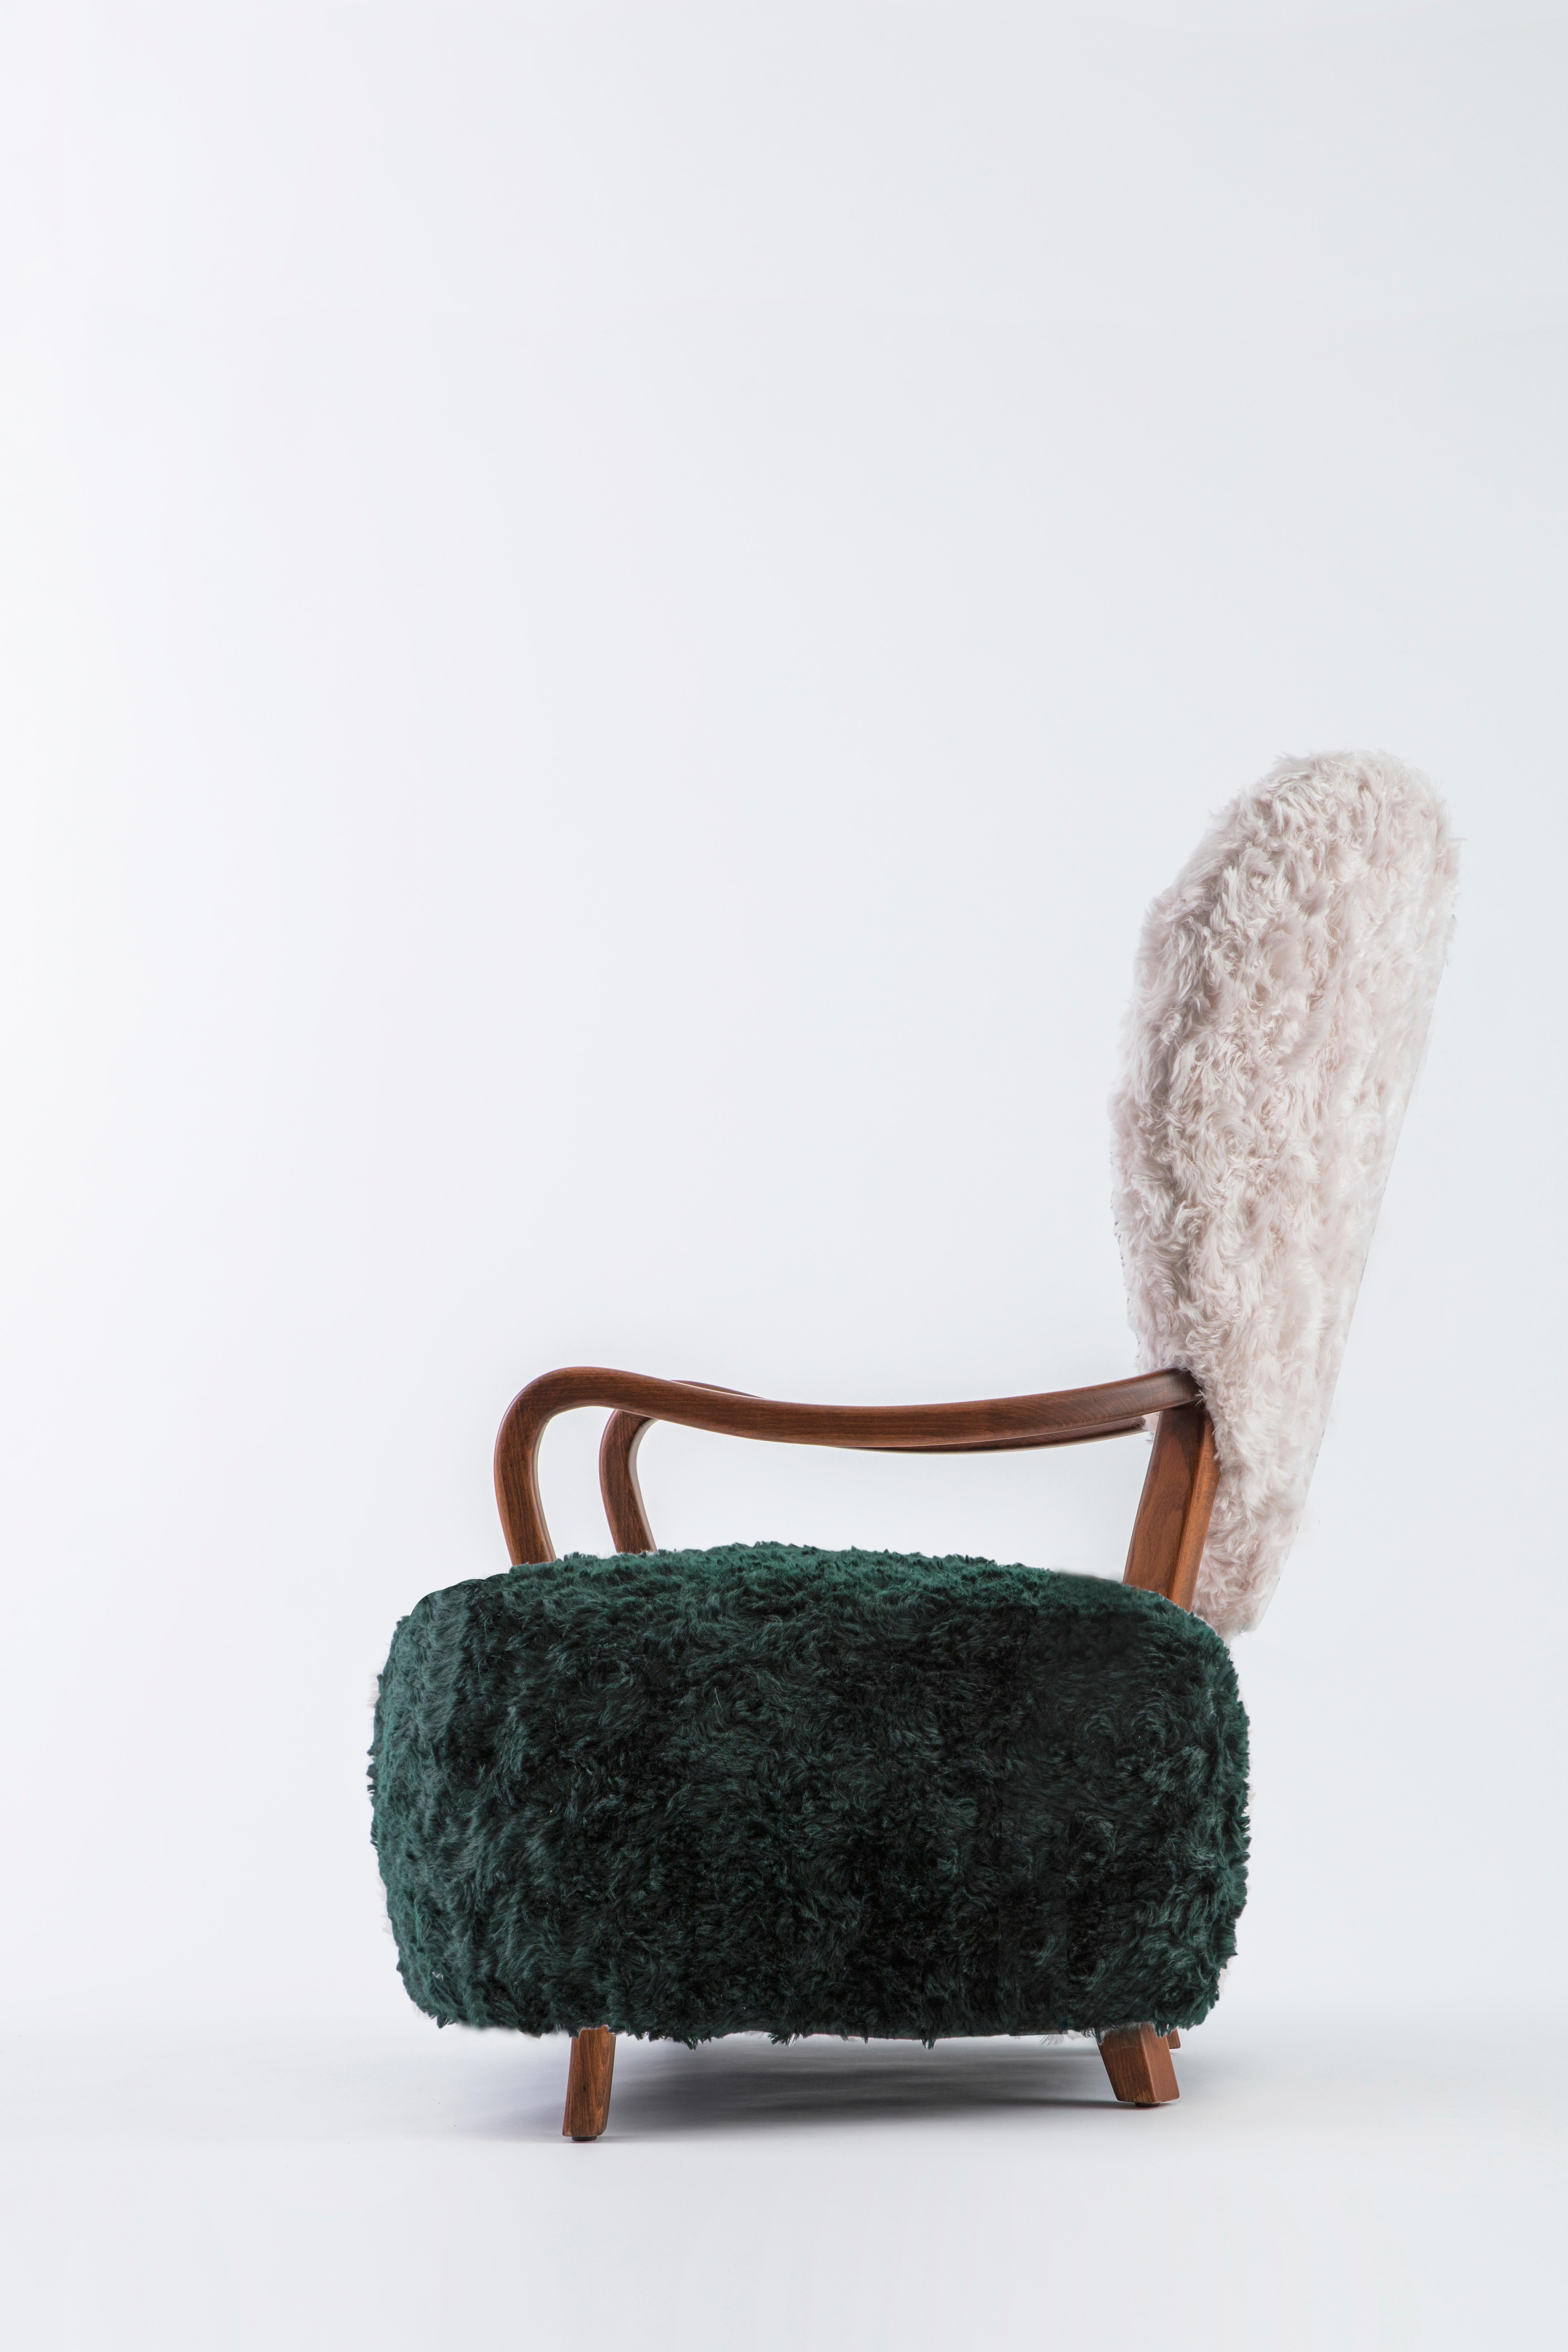 Turkish Contemporary Beechwood Uni Armchair with Green and Cream Mohair Upholstery For Sale